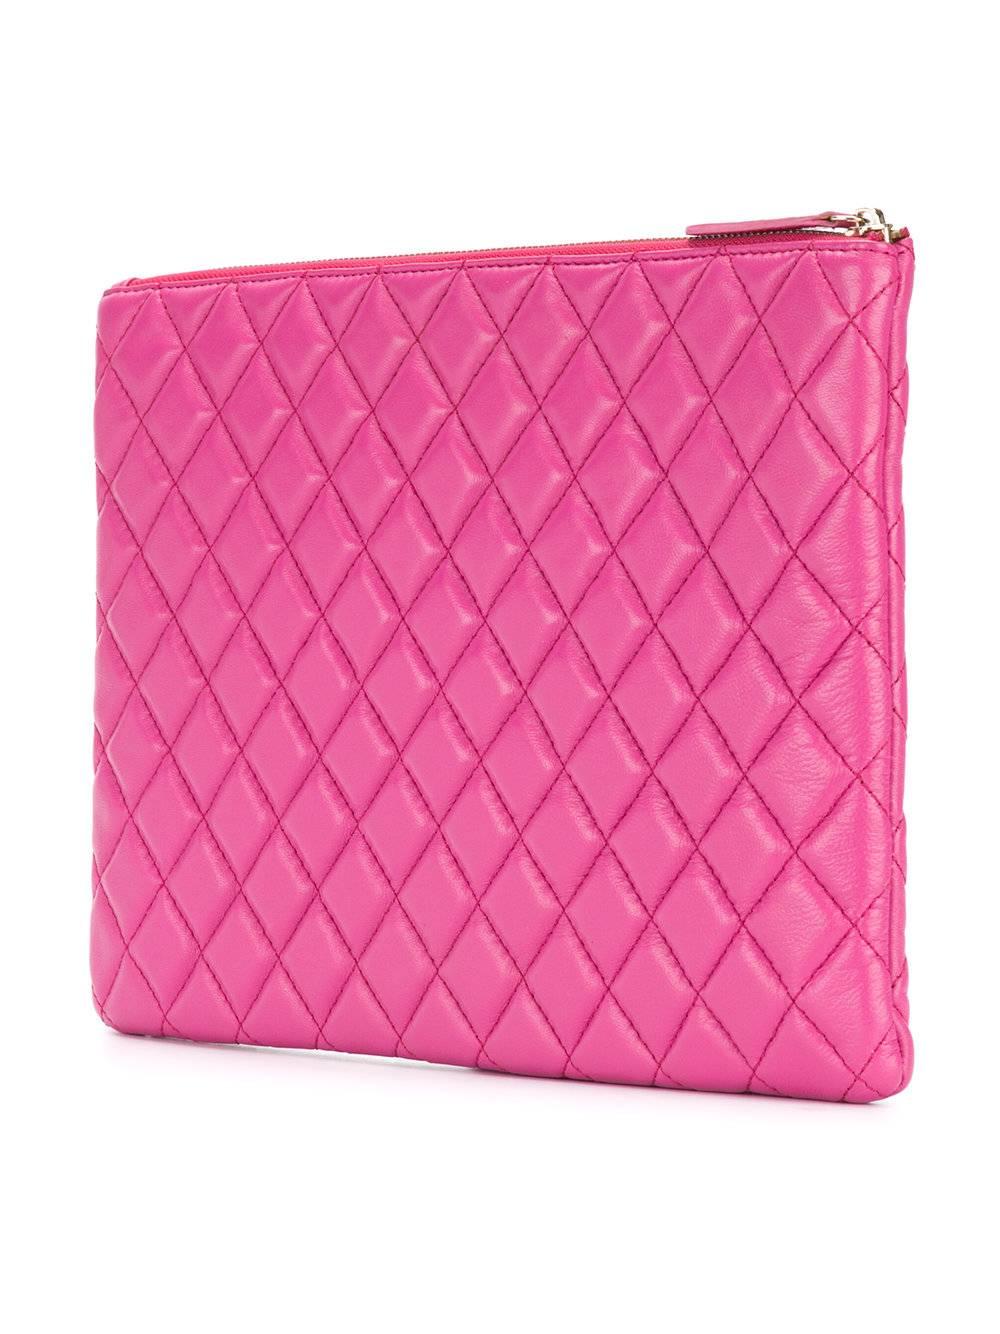 Made in France, this feminine item comes in a fashionable pink and modern design. The soft lambskin is quilted with an allover diamond pattern, adorned with a delicate interlocking metal CC centred on the front. It also features a logo patched main